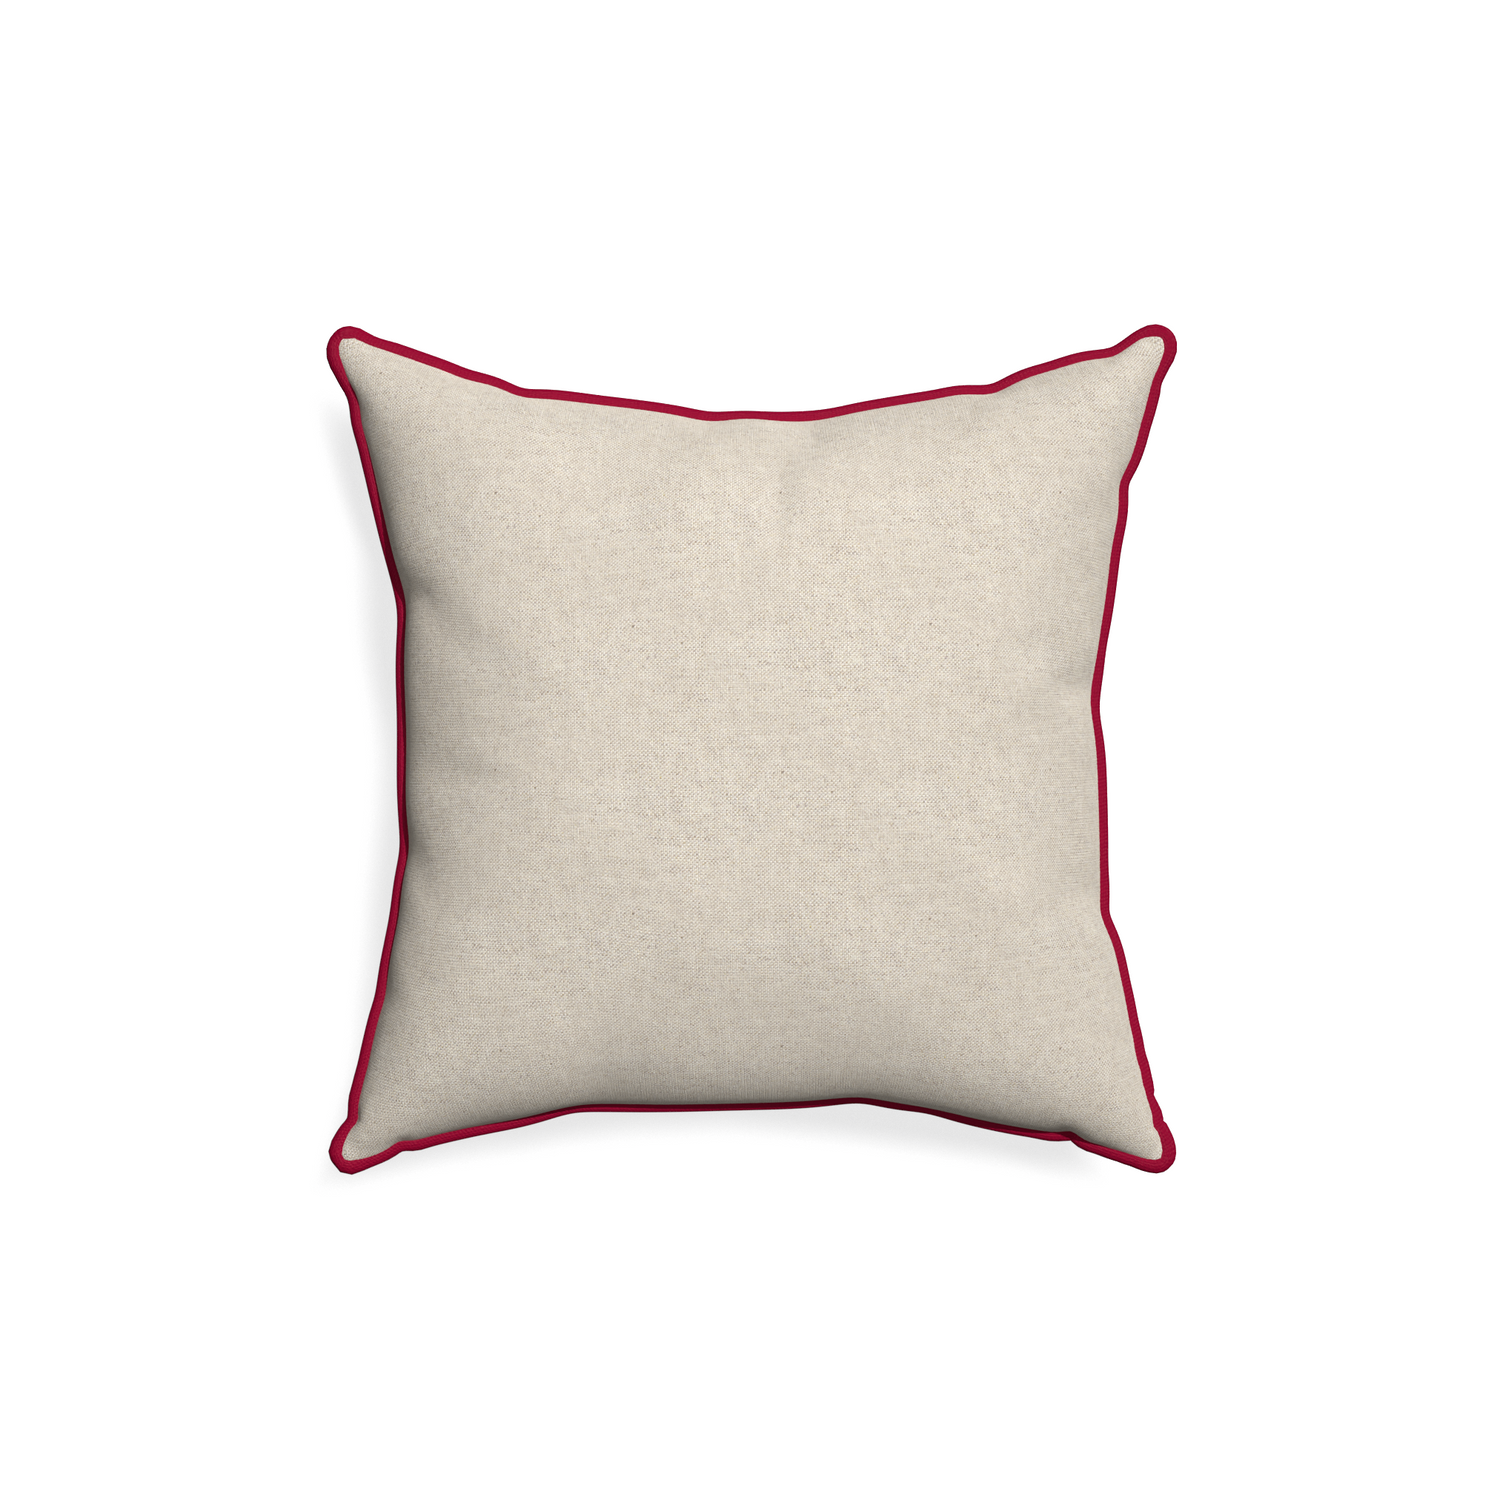 18-square oat custom light brownpillow with raspberry piping on white background